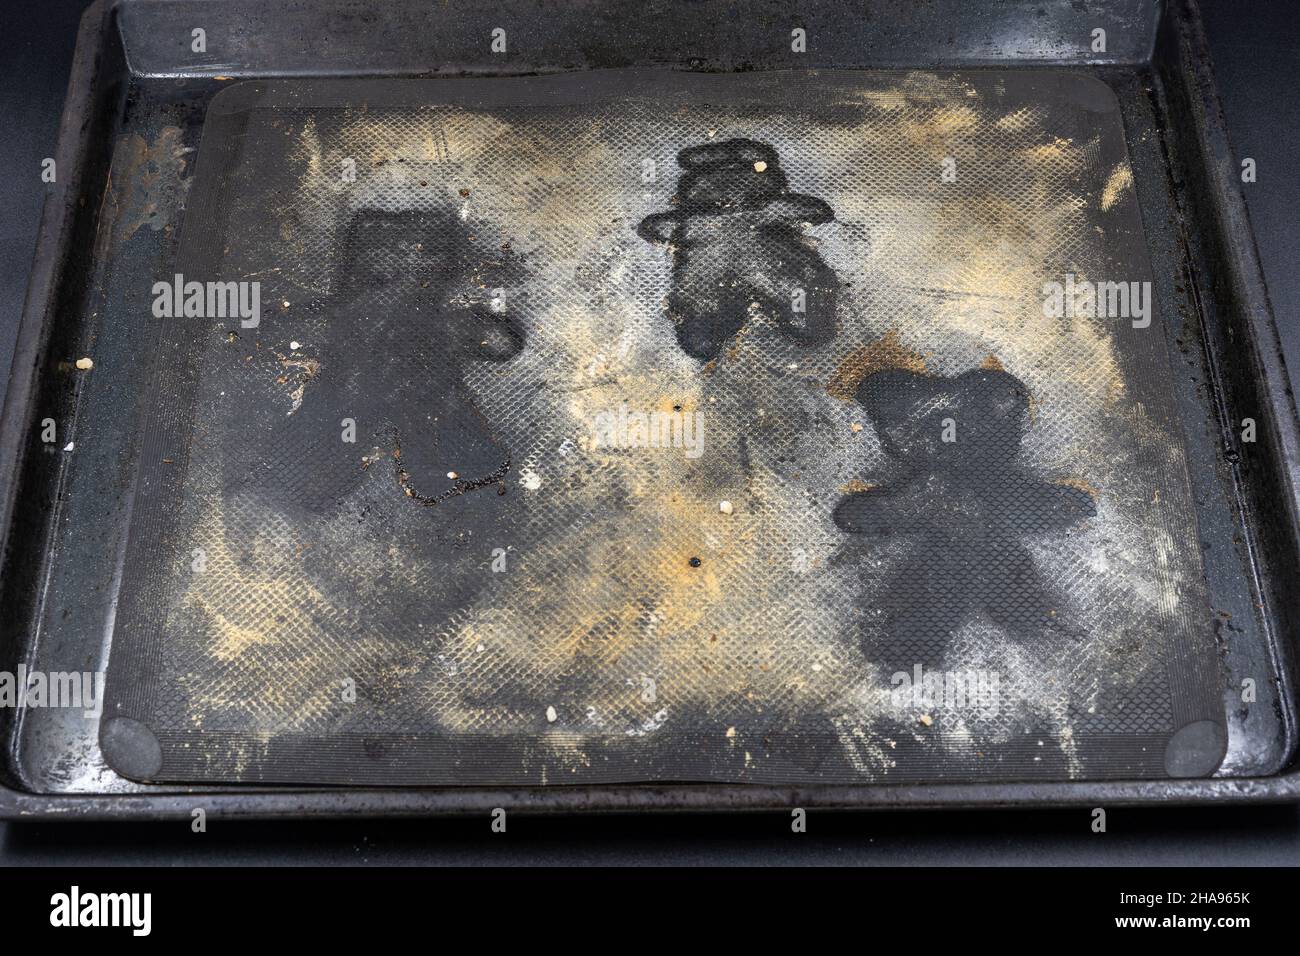 Empty baking sheet with shape of Grittibänz. It's pastry, made of sweet leavened dough, in the form of a man, available usually around Saint Nicholas' Stock Photo